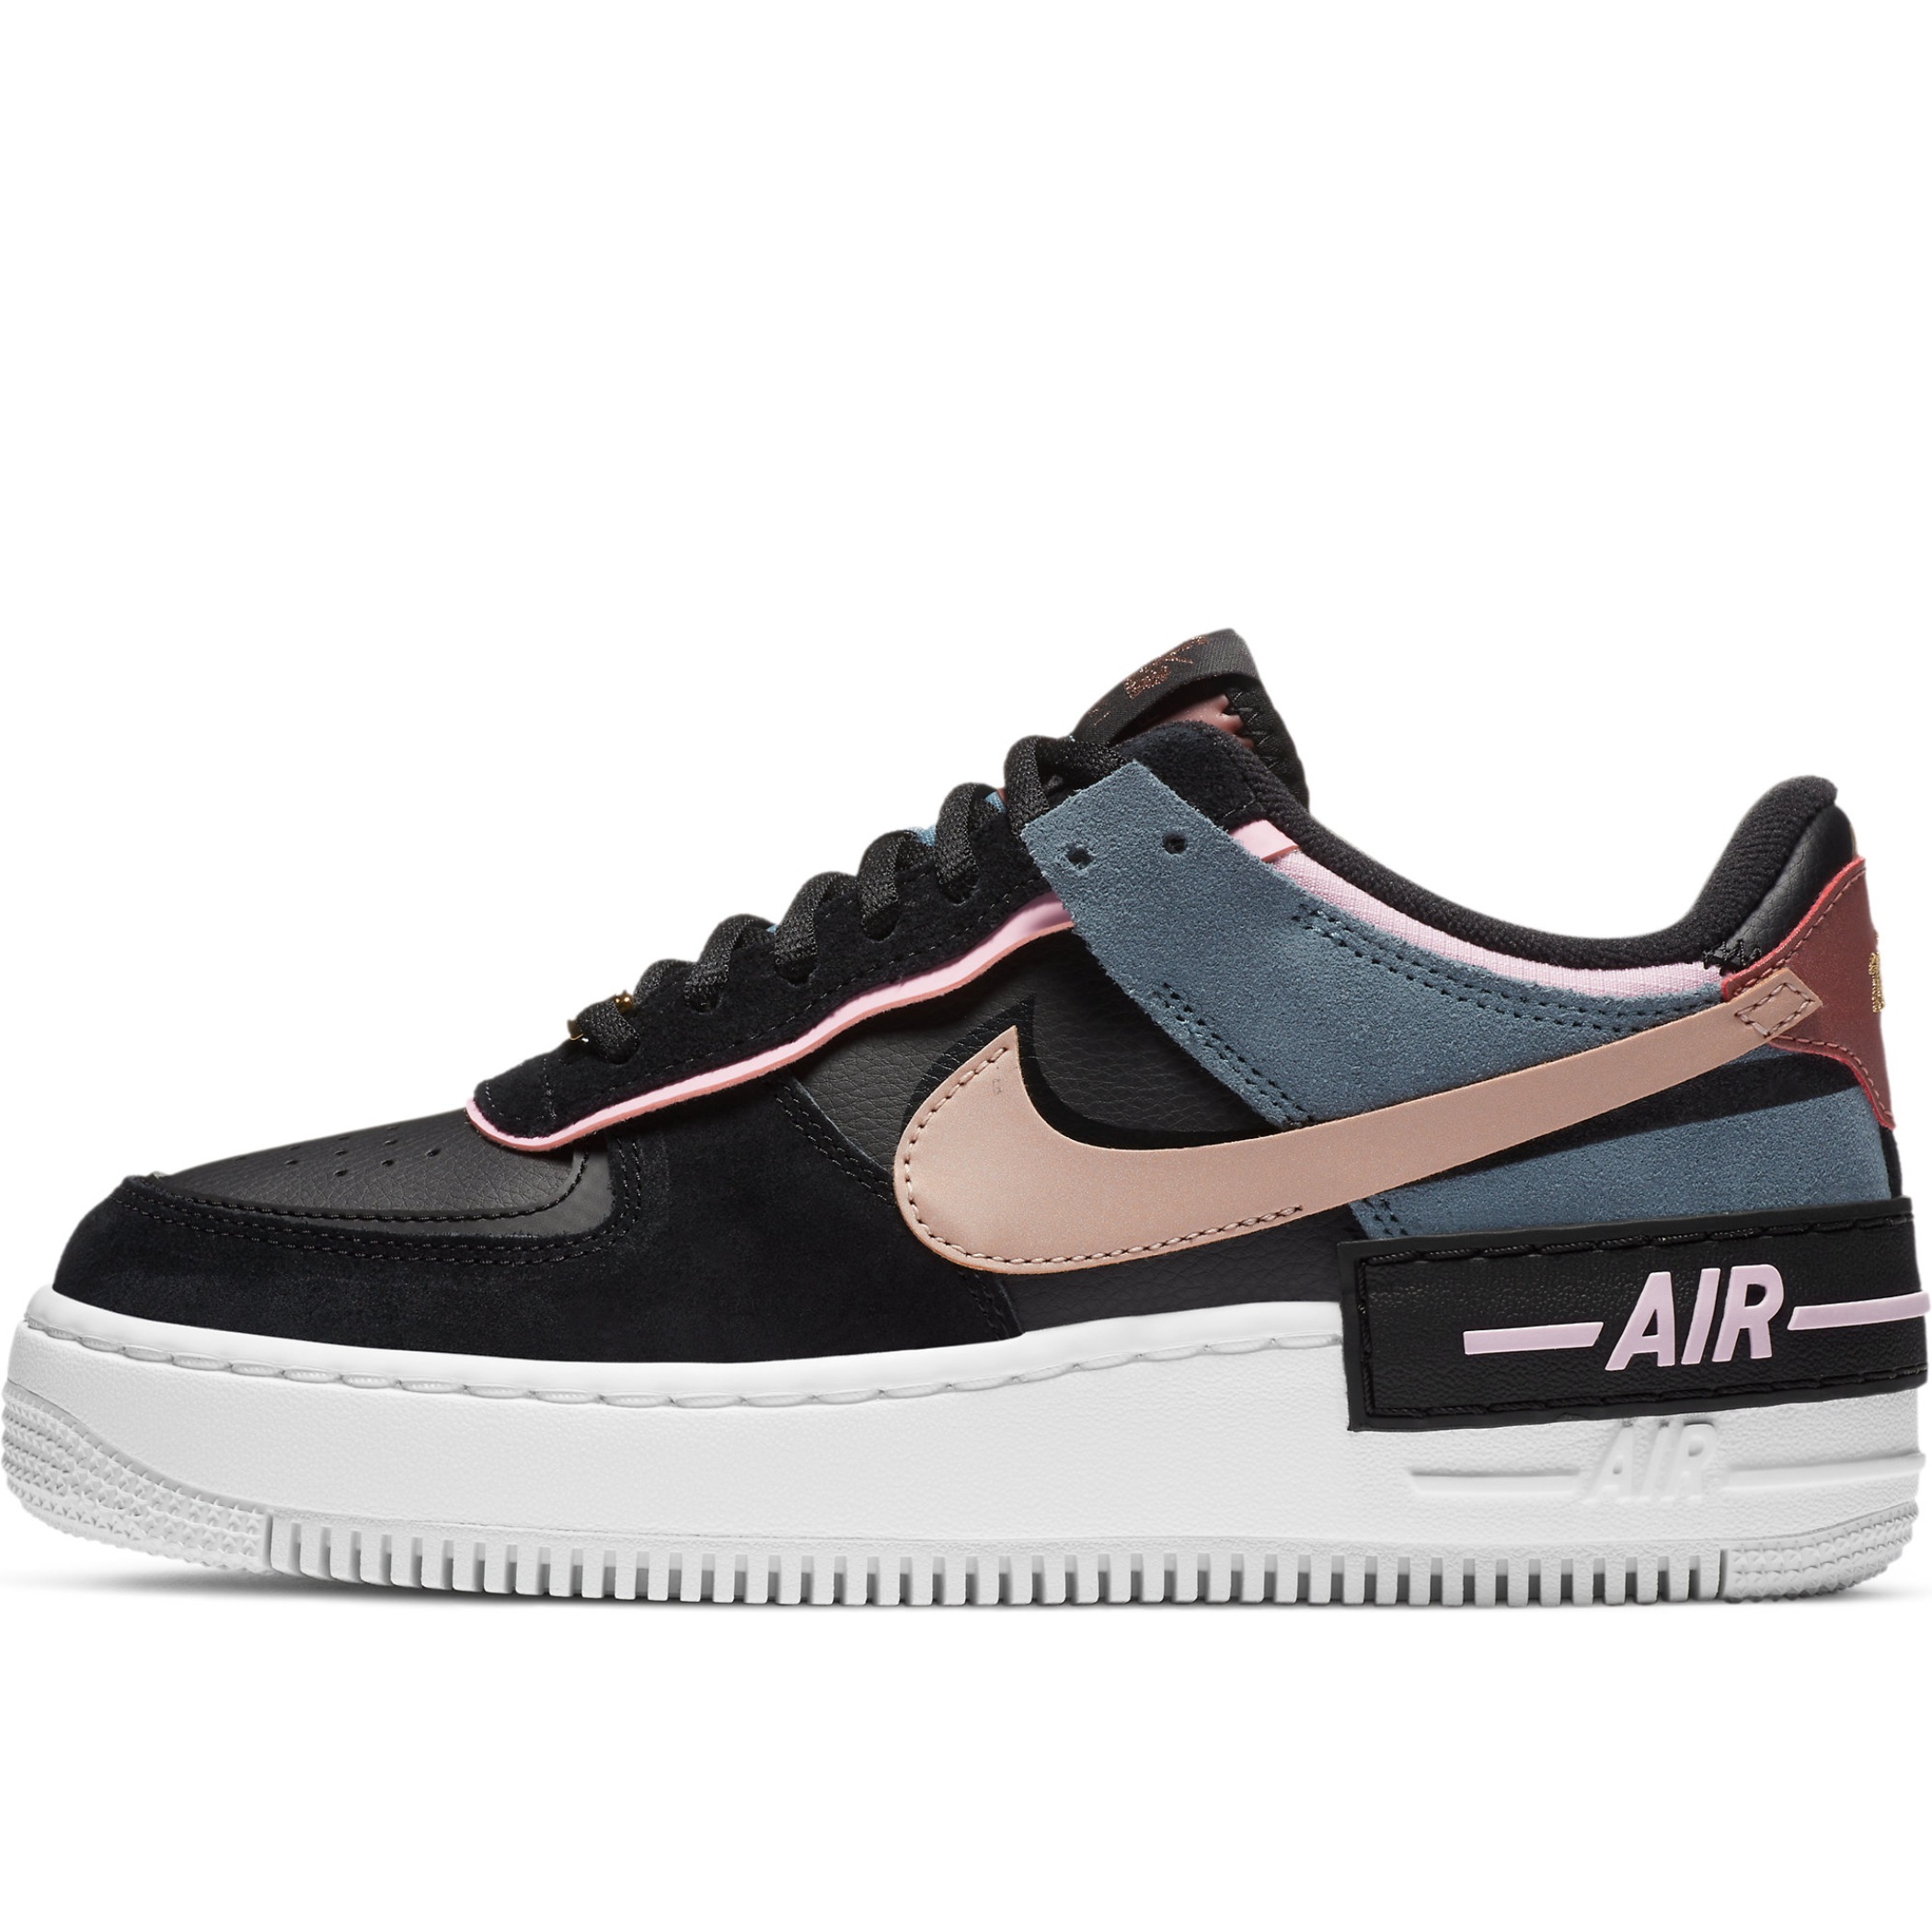 nike air force 1 shadow pink and red